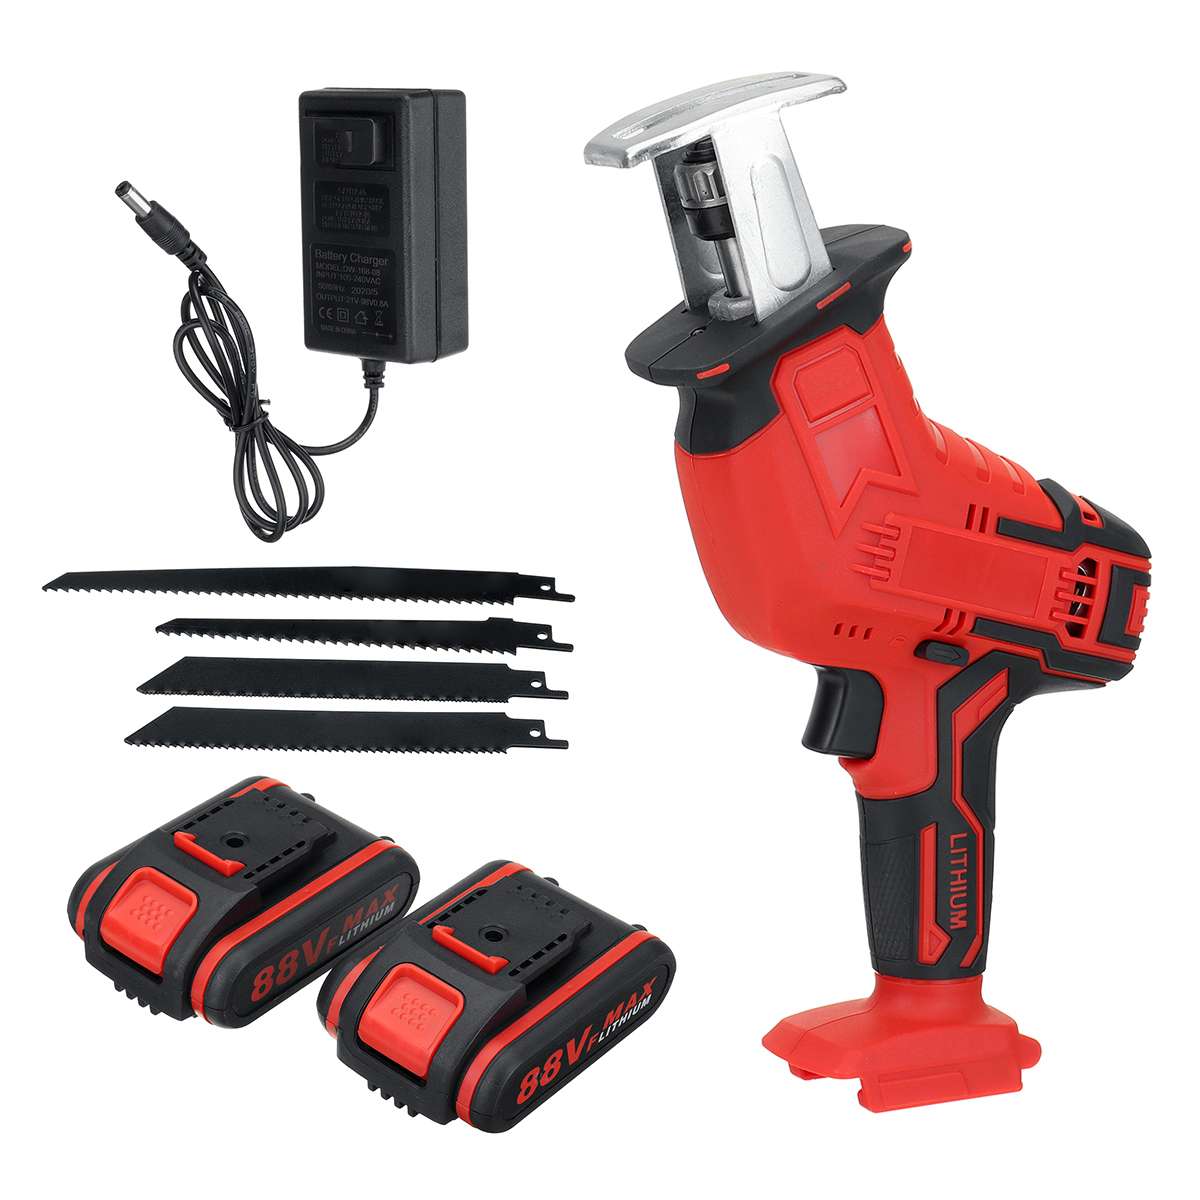 88VF-Electric-Reciprocating-Saw-Outdoor-Cordless-Portable-Saw-Woodworking-Cutter-1733463-11